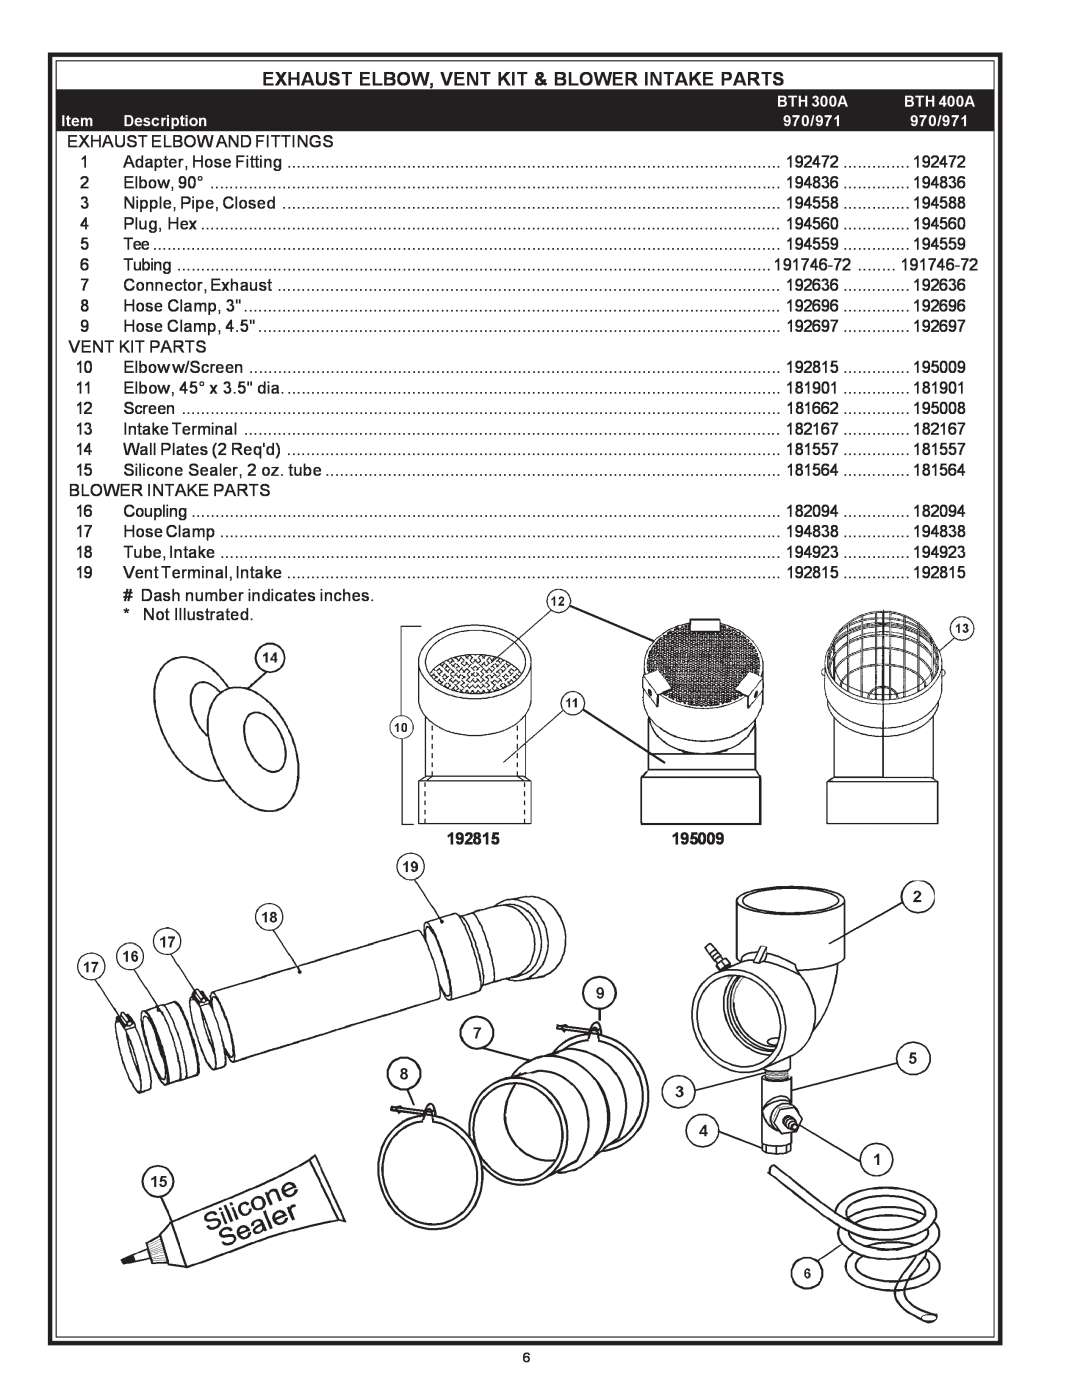 A.O. Smith 970 Series manual Exhaust Elbow, Vent Kit & Blower Intake Parts, 192815195009, BTH 300A, BTH 400A, Description 